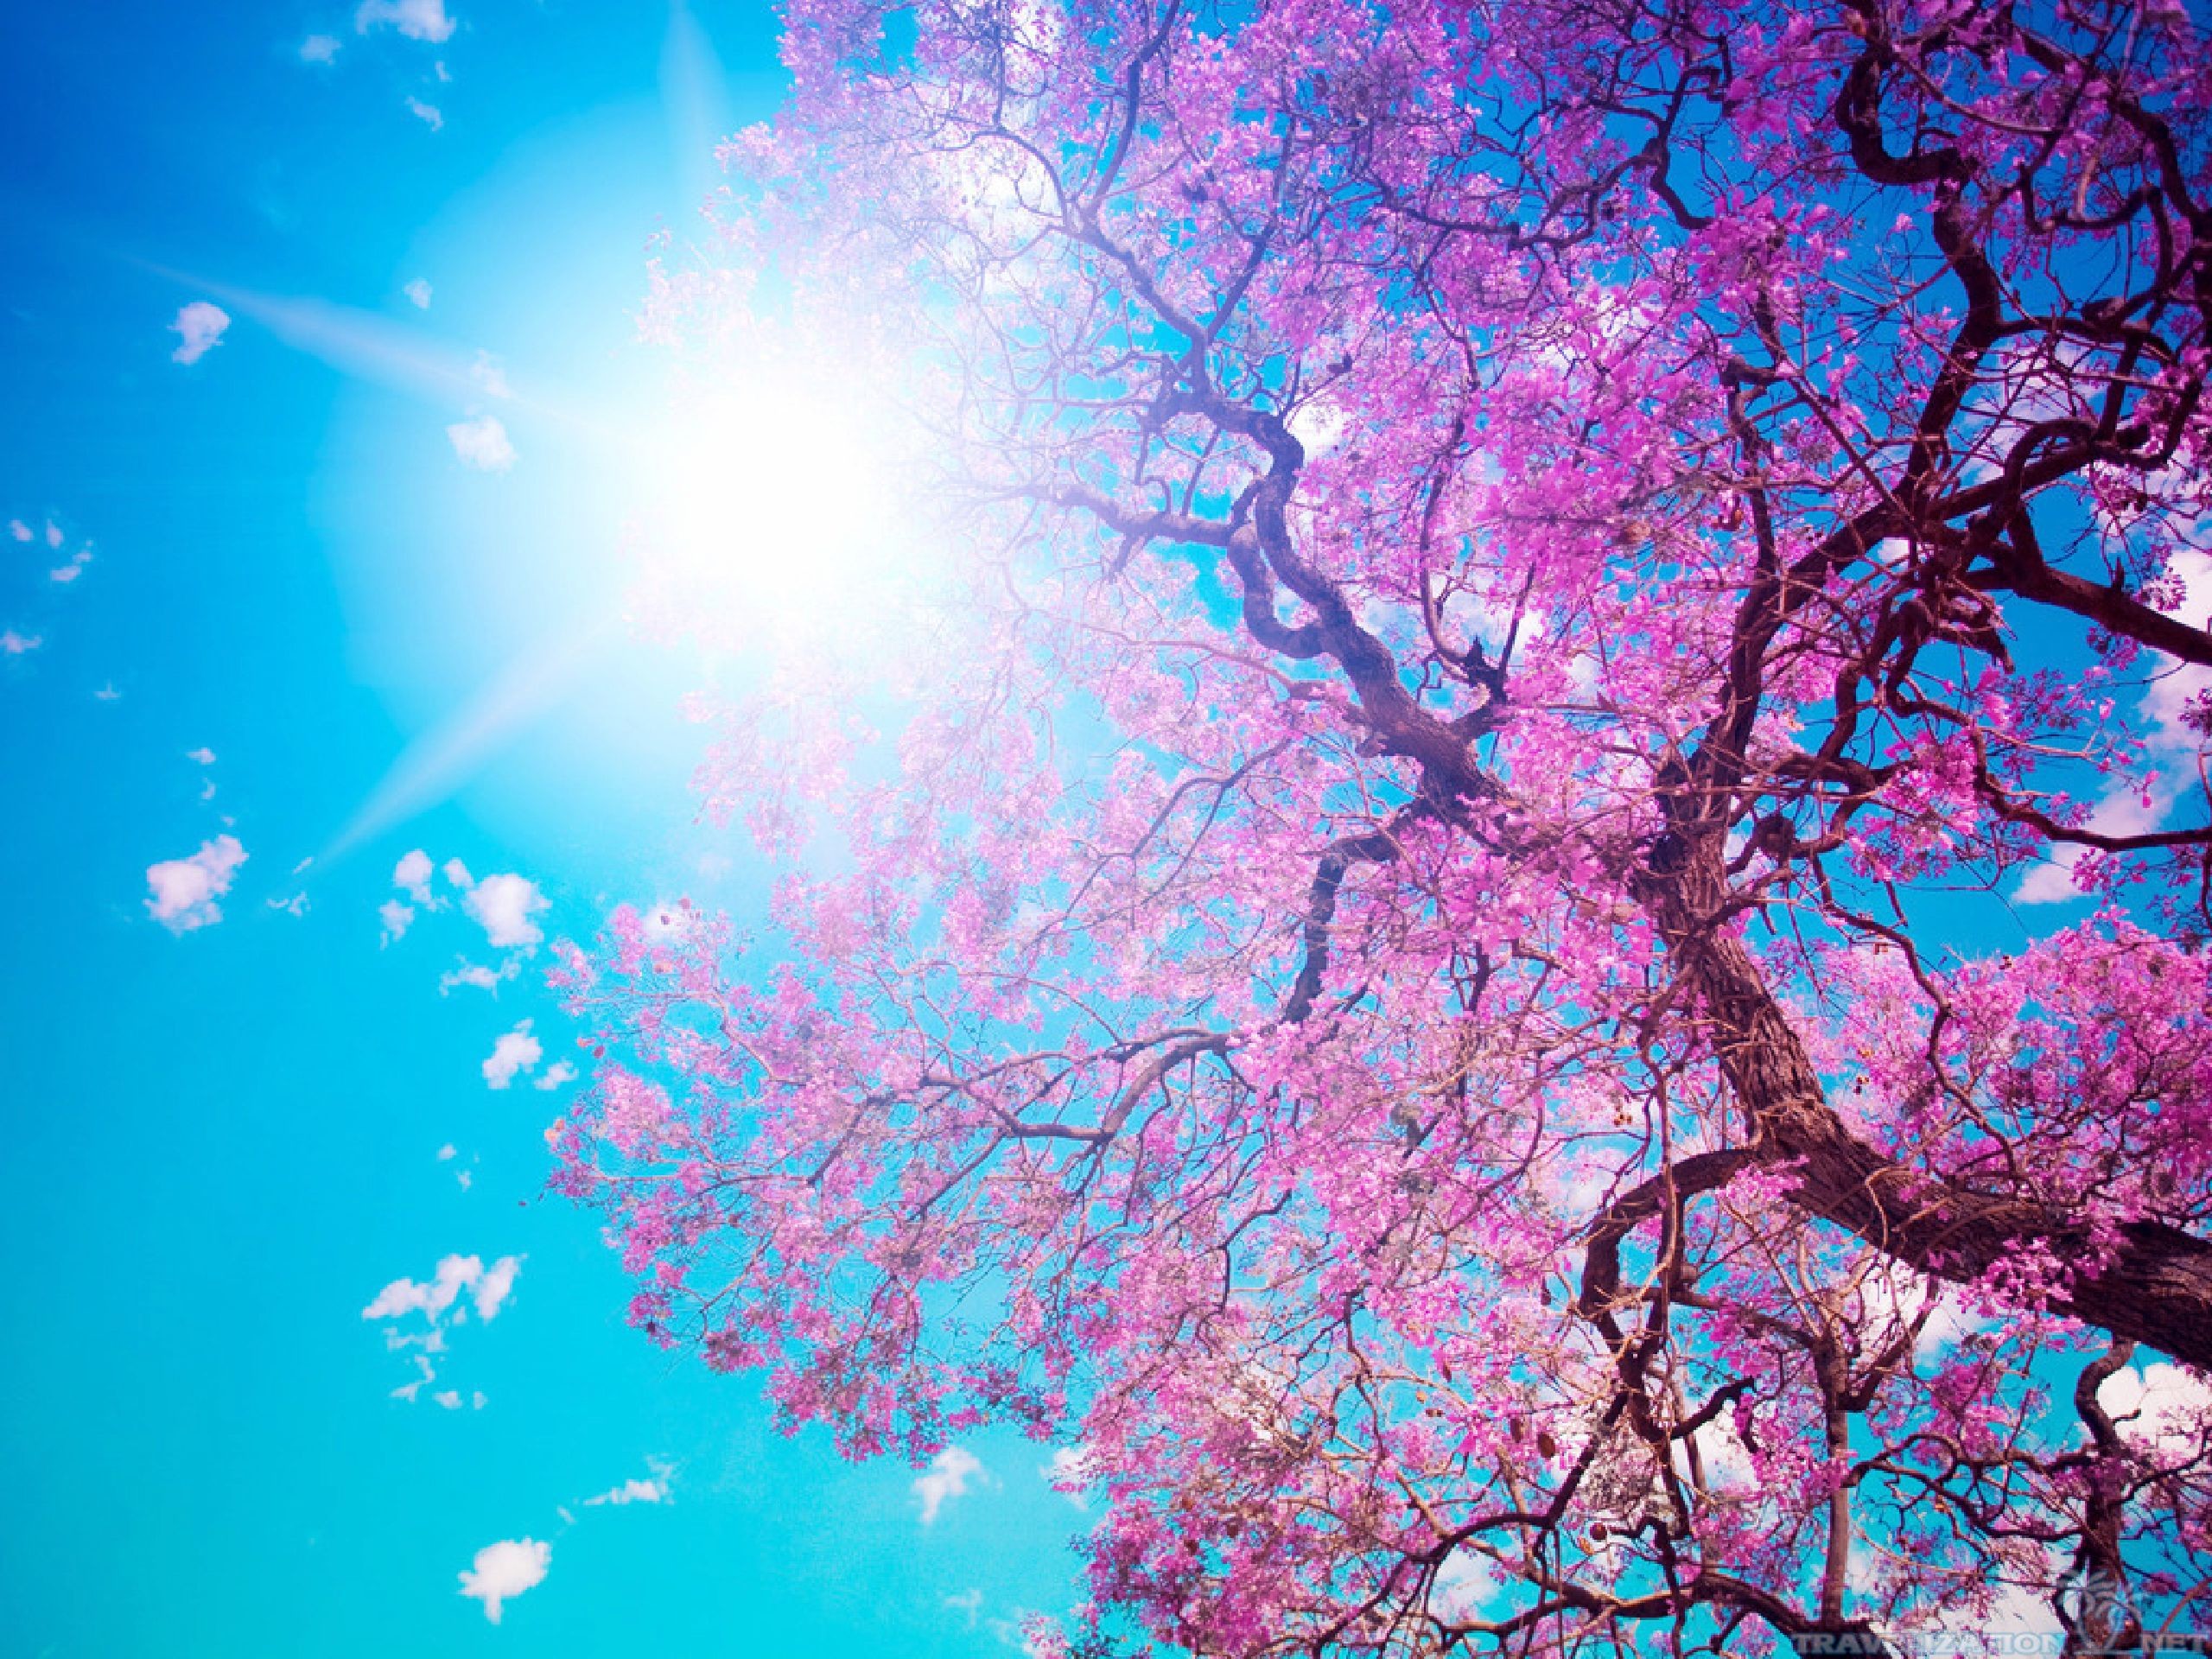 You Can Find Beautiful Tree Wallpapers In Many Resolution - Nike Sb Hd -  2560x1920 Wallpaper 